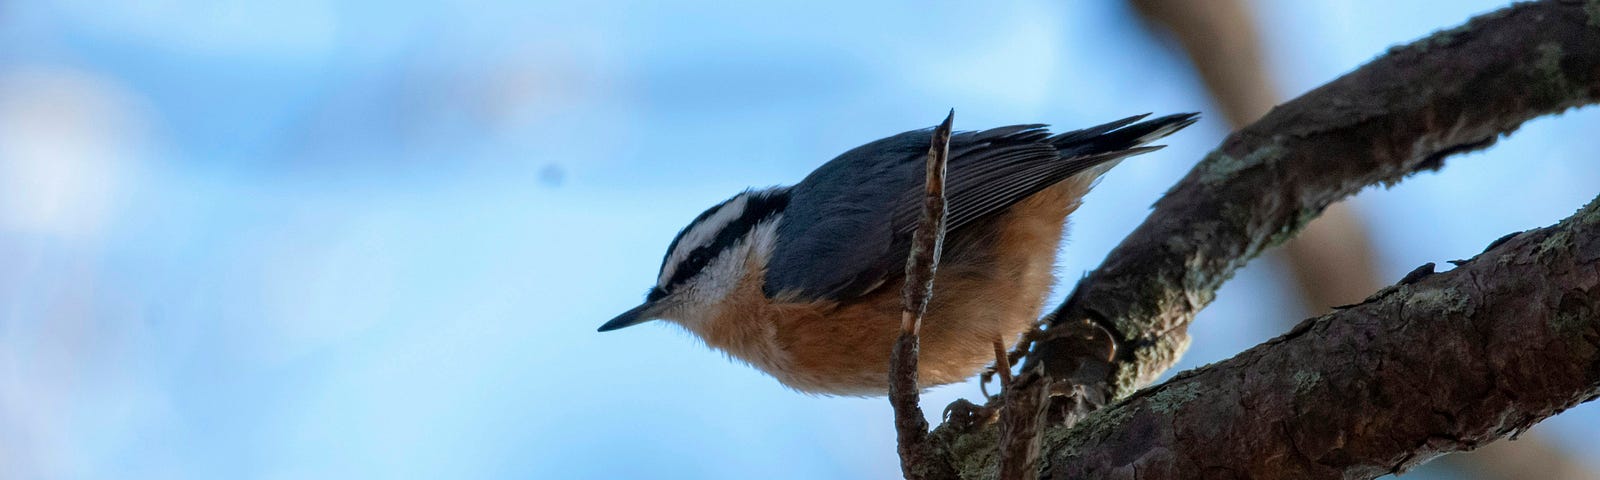 A small bird on a branch, black streak of weathers under its looking like a WWI flying Ace. Gray feathers across back and wings with a white fluffy belly. Its small, maybe a chickadee, perched on a branch at eye level.